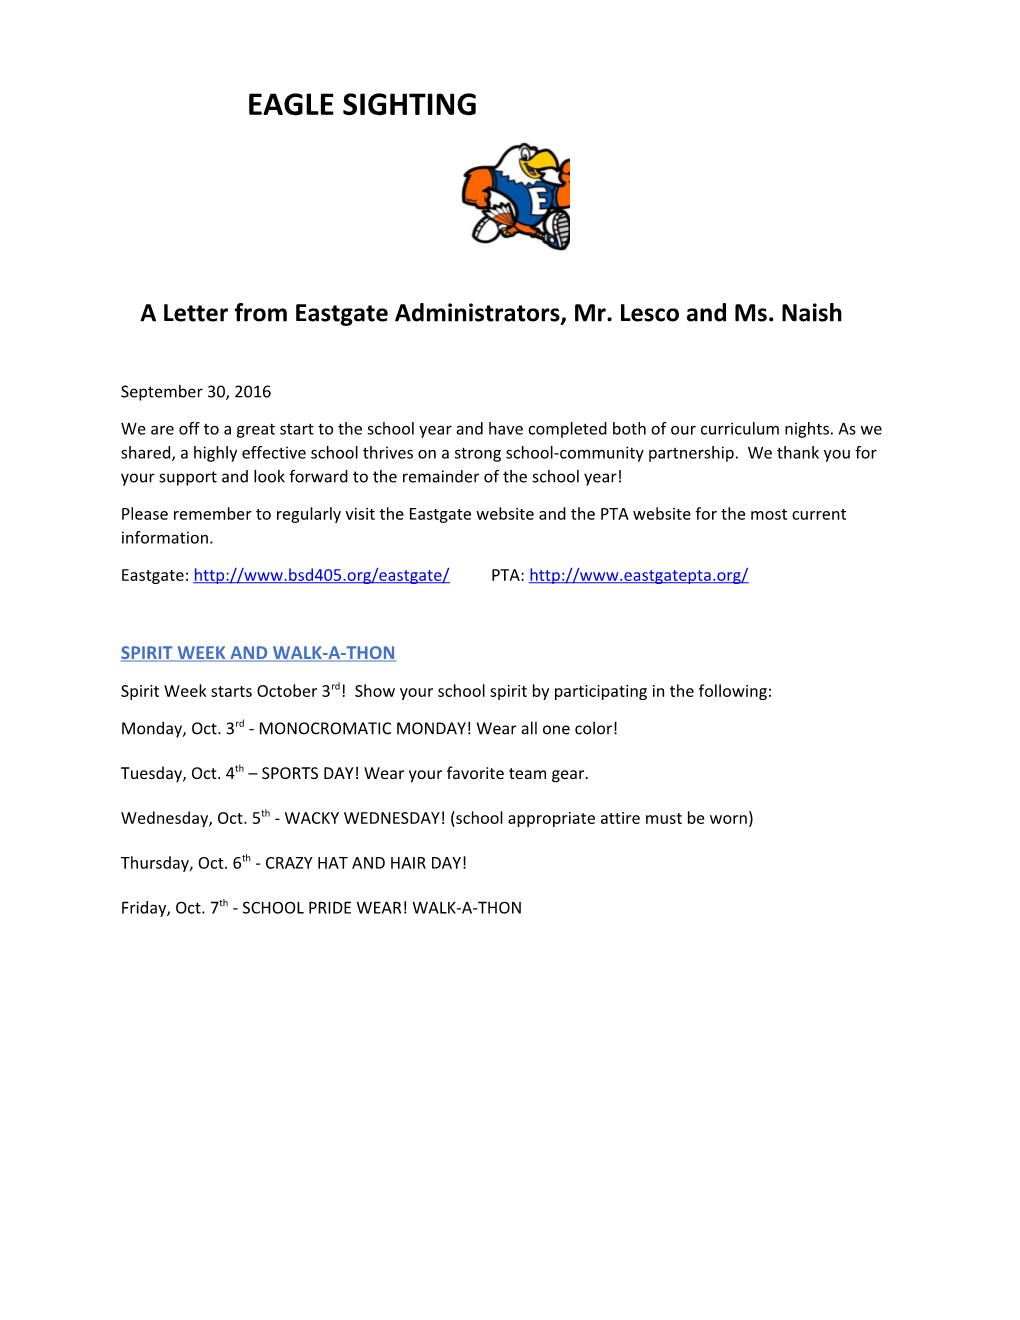 A Letter from Eastgate Administrators, Mr. Lesco and Ms. Naish